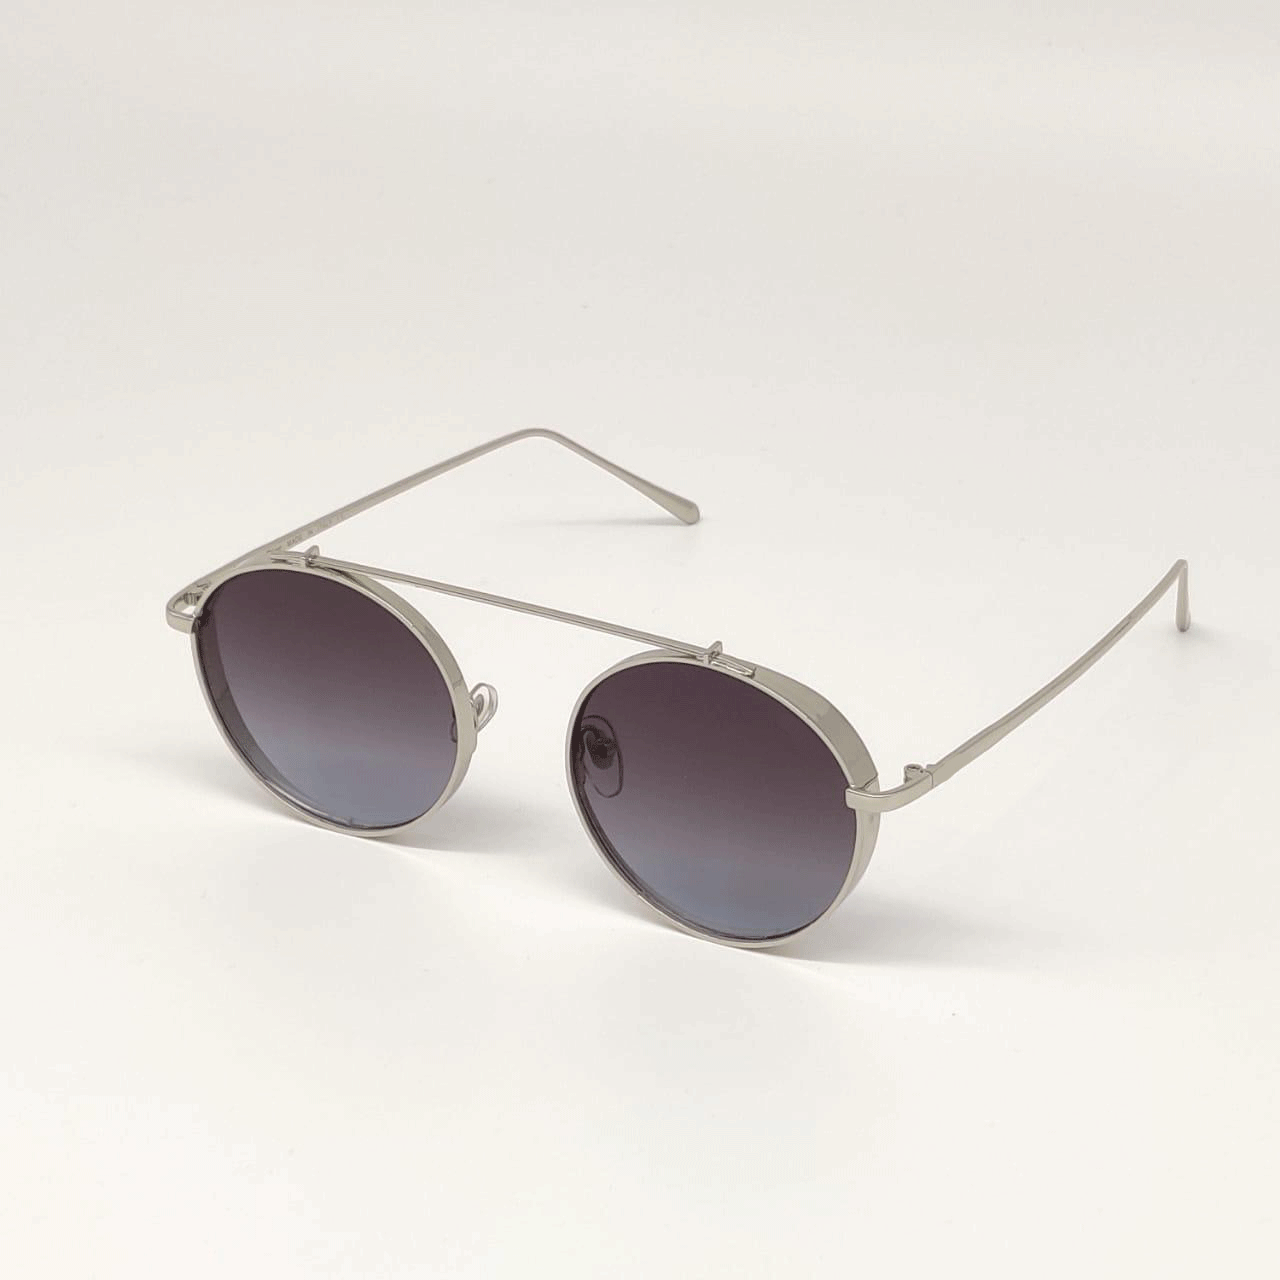 Trendy Round Sunglasses For Men And Women-Unique and Classy